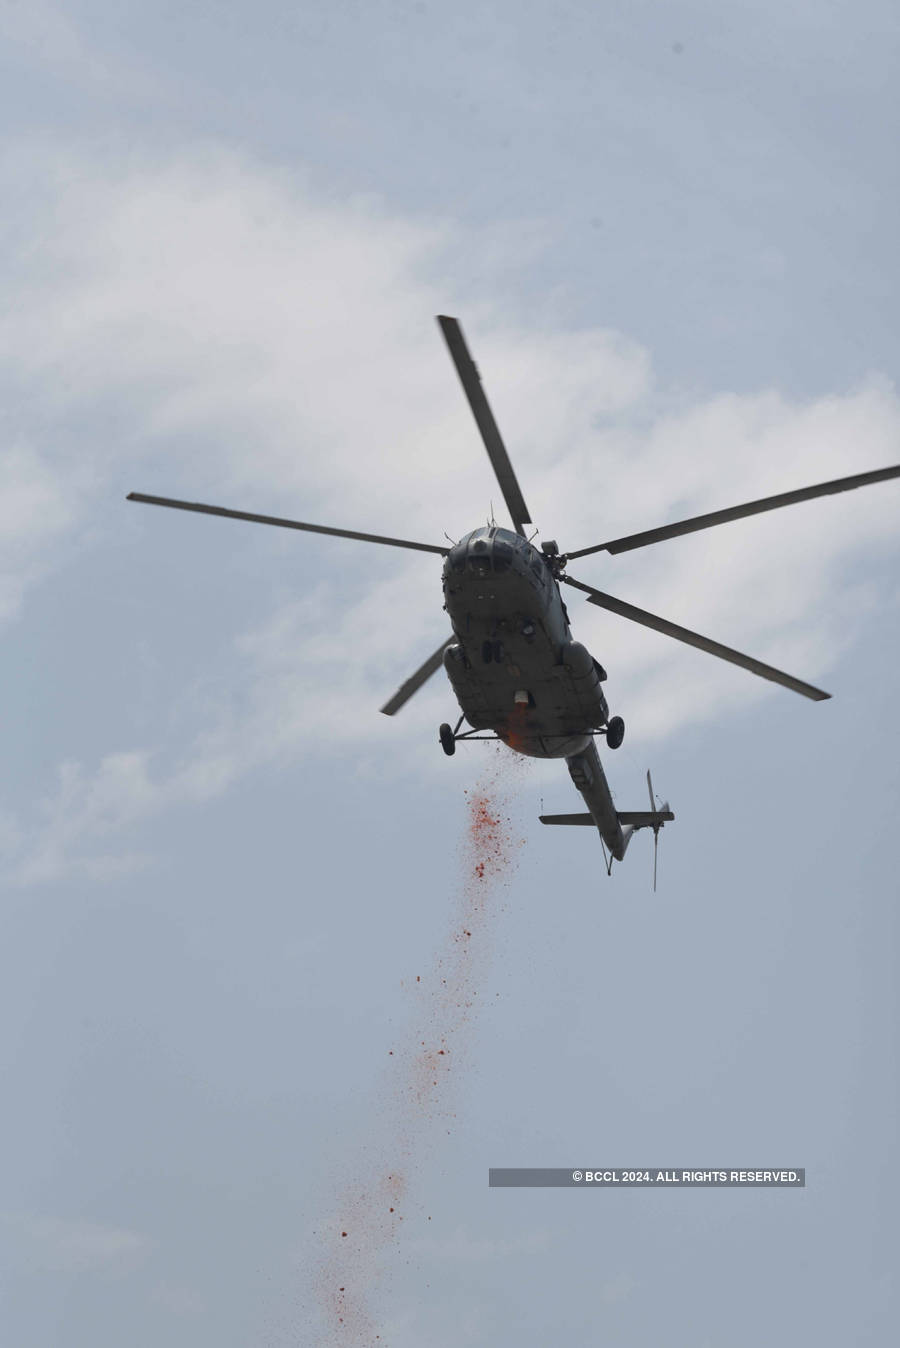 Armed forces salute 'corona warriors' by showering flower petals from choppers